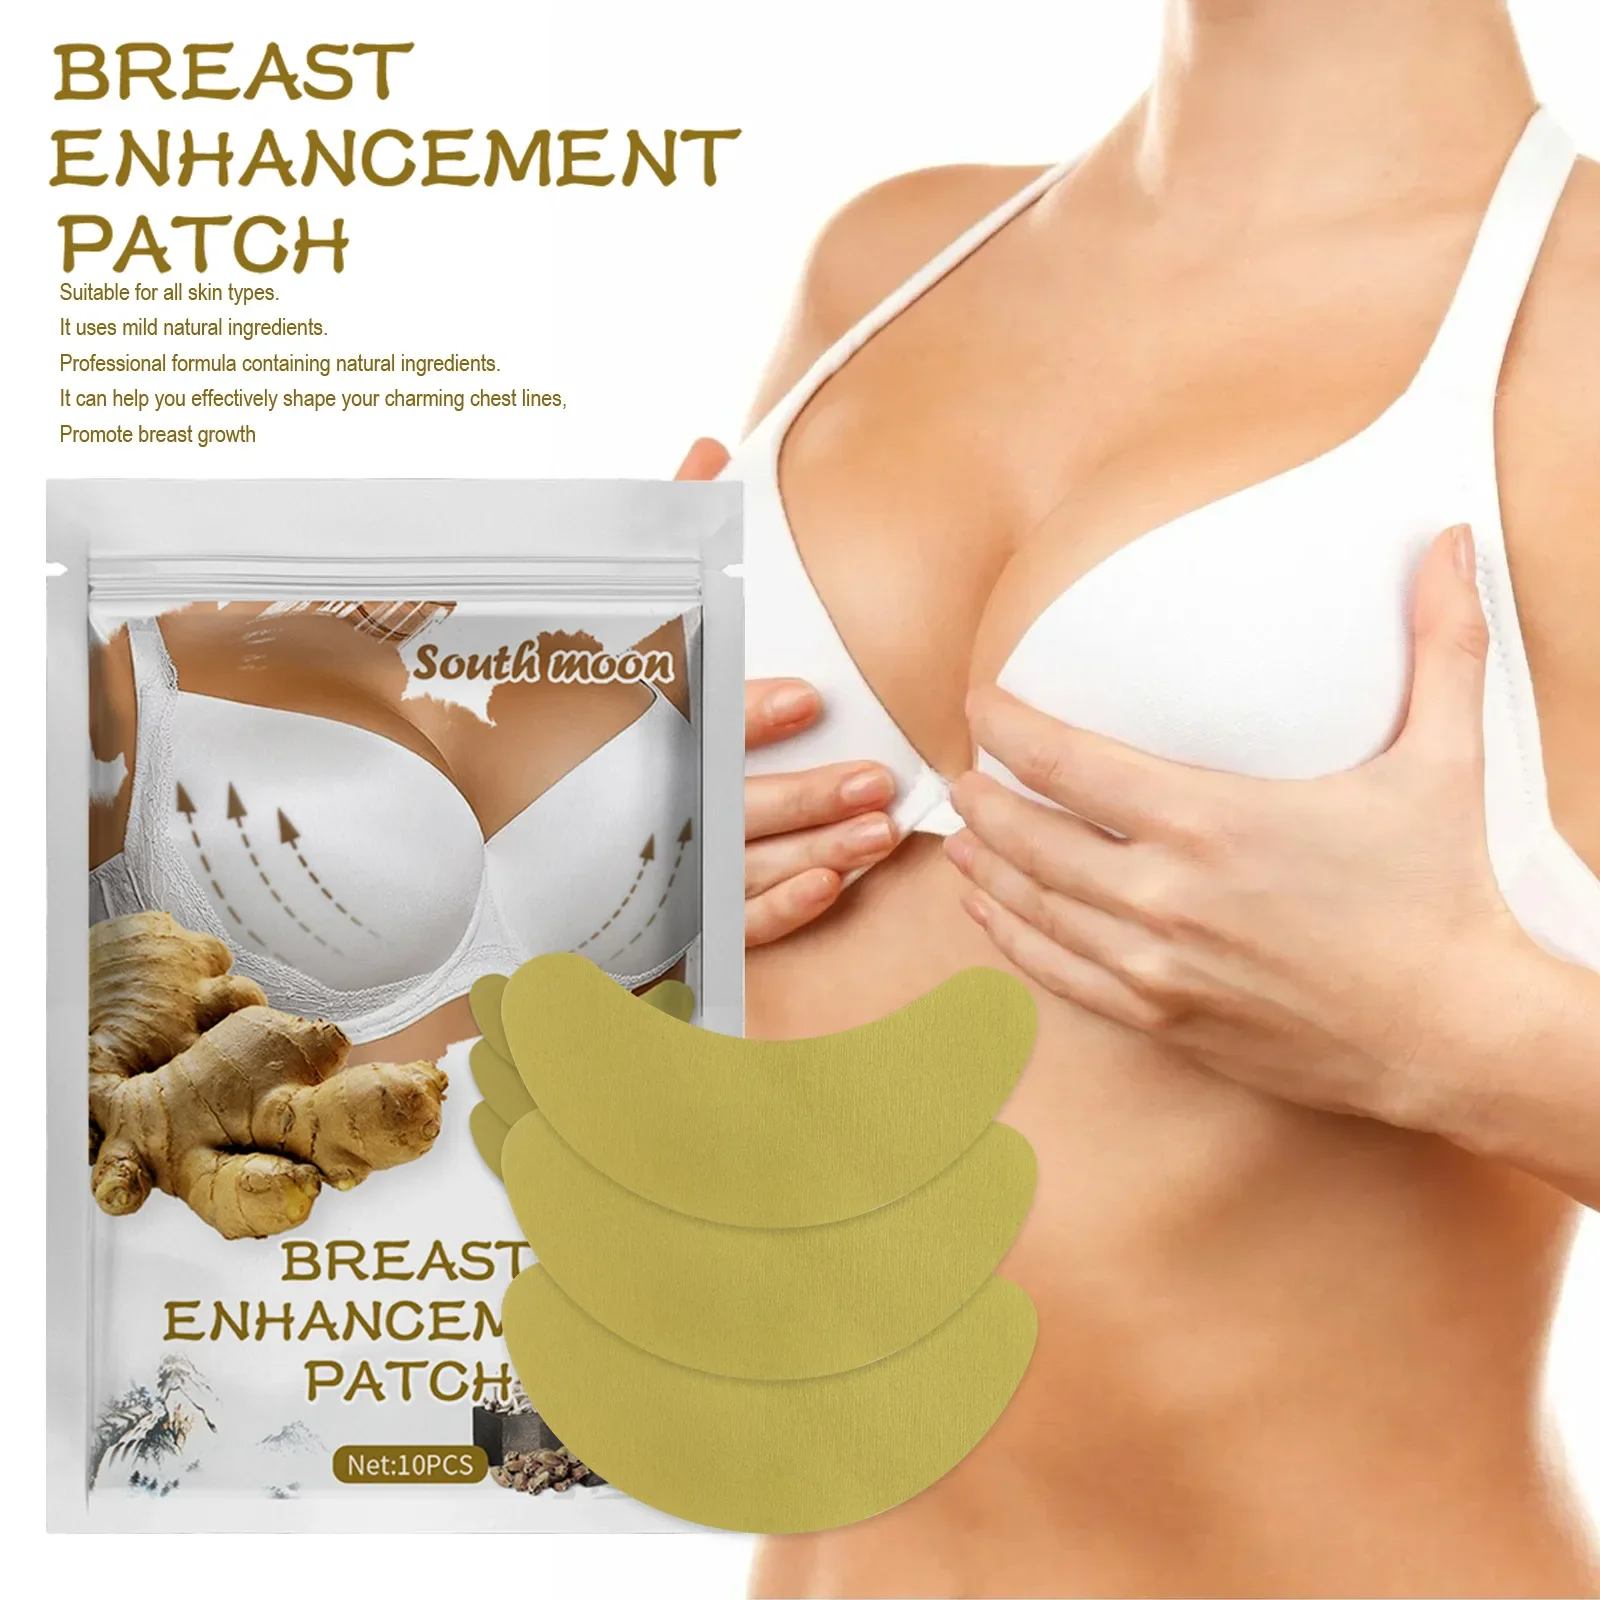 

Breast Tightening Products Bust Enhancement Promote Boobs Lifting Breast Fast Growth Firming Up Size Chest Care Sexy Body Care